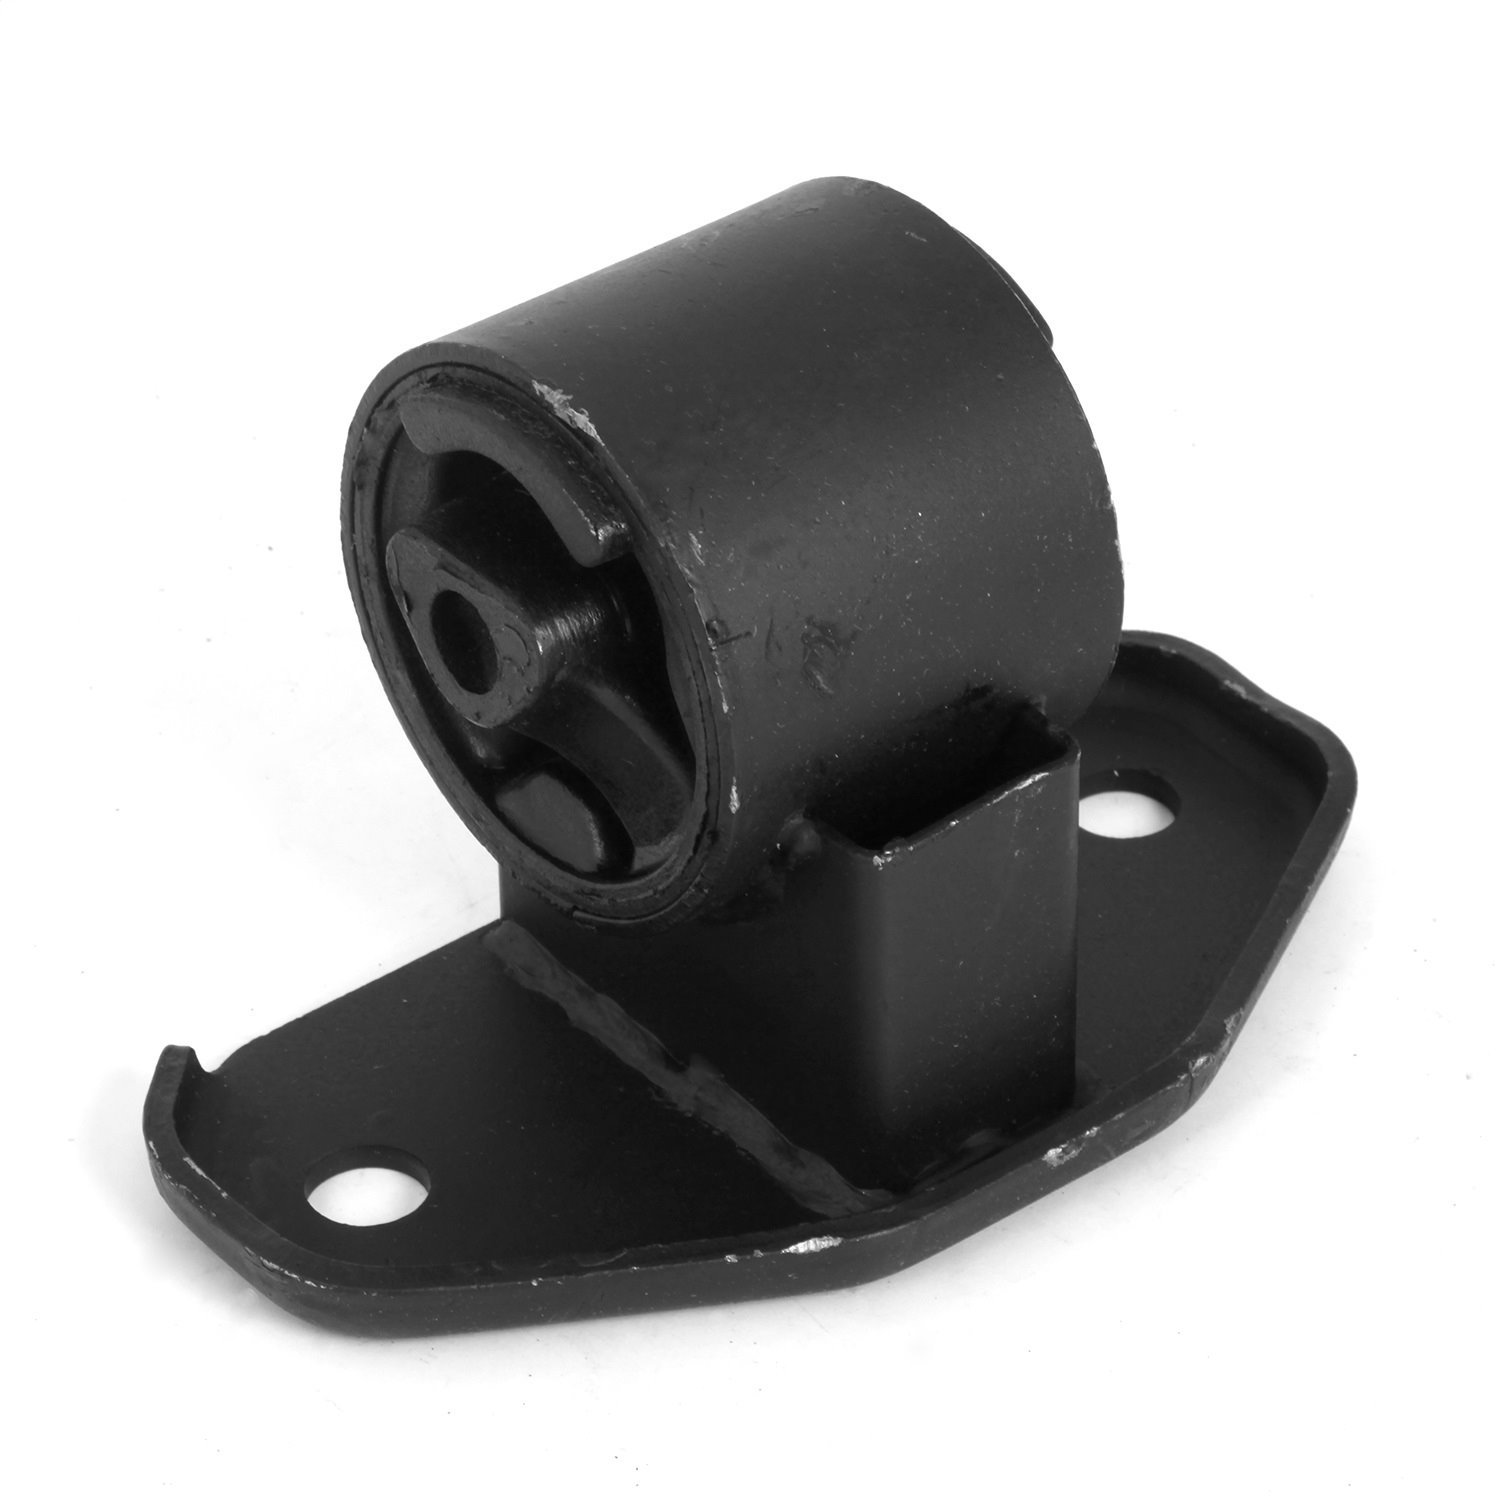 Replacement Transmission Mount For 2002-2004 Jeep Liberty KJ 2WD 3.7L By Omix-ADA